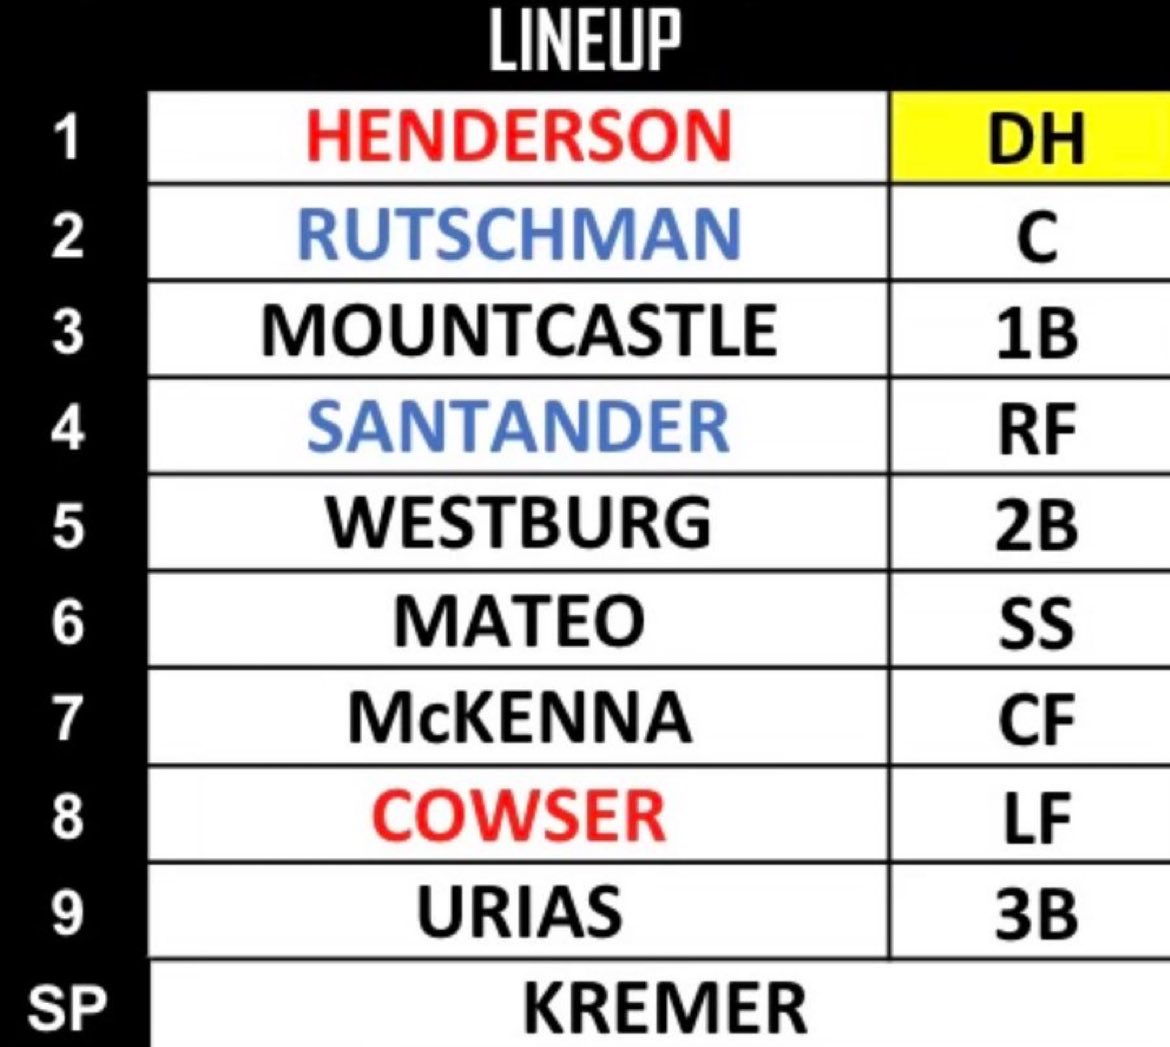 Finale in Cincy is 4:10p first pitch. Here’s how they line up vs the Reds best, Nick Lodolo. See you on the airwaves!